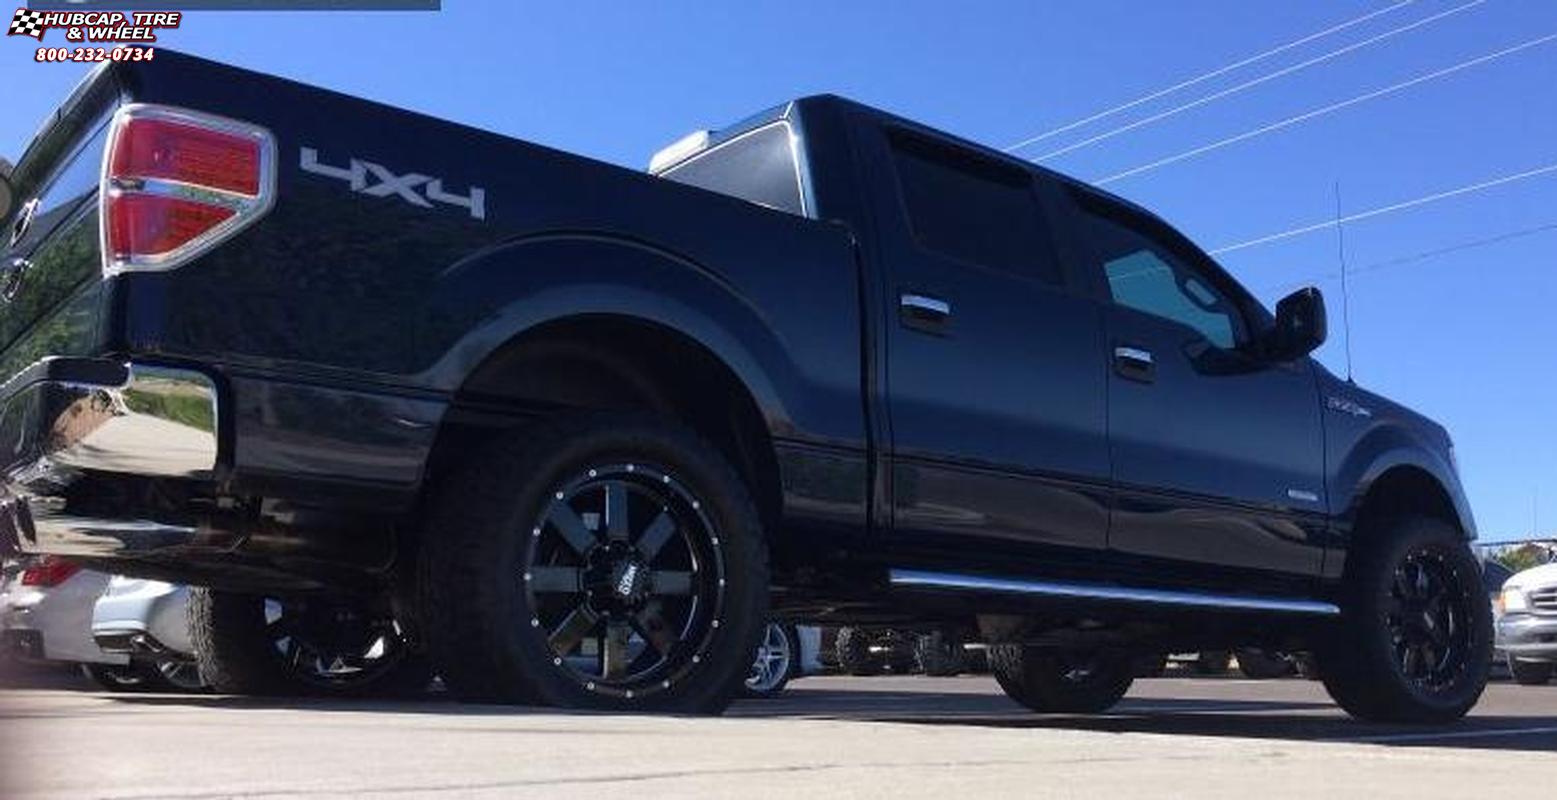 vehicle gallery/2013 ford f 150 moto metal mo962  Gloss Black & Milled wheels and rims